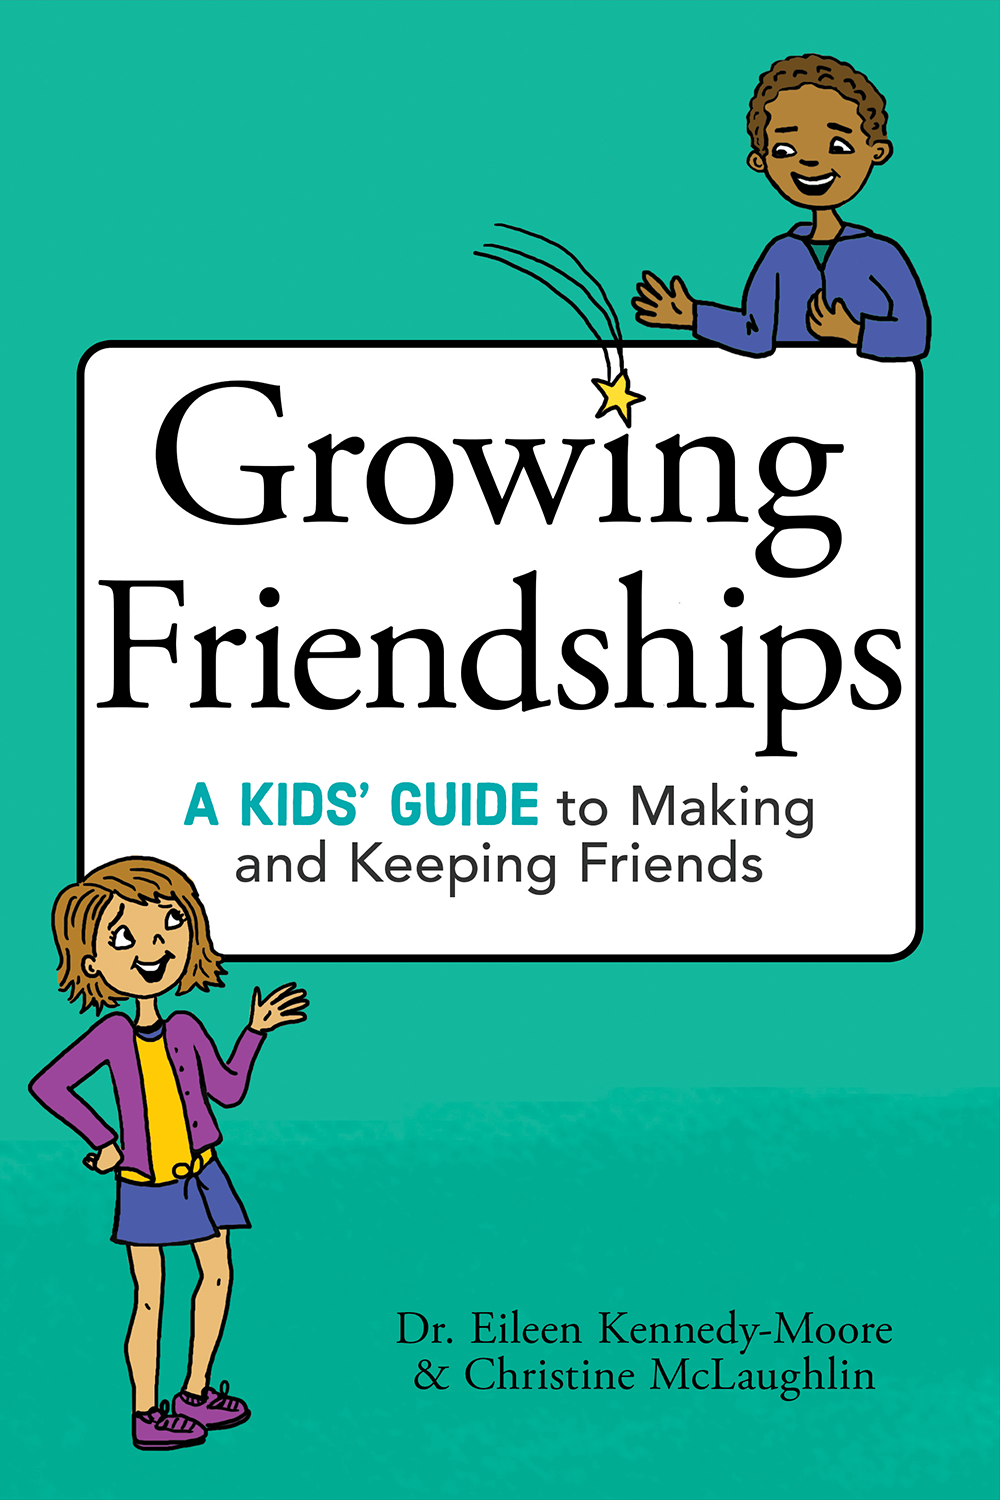 Friendship Board Game - School Counseling Friendship Game with Digital  Version